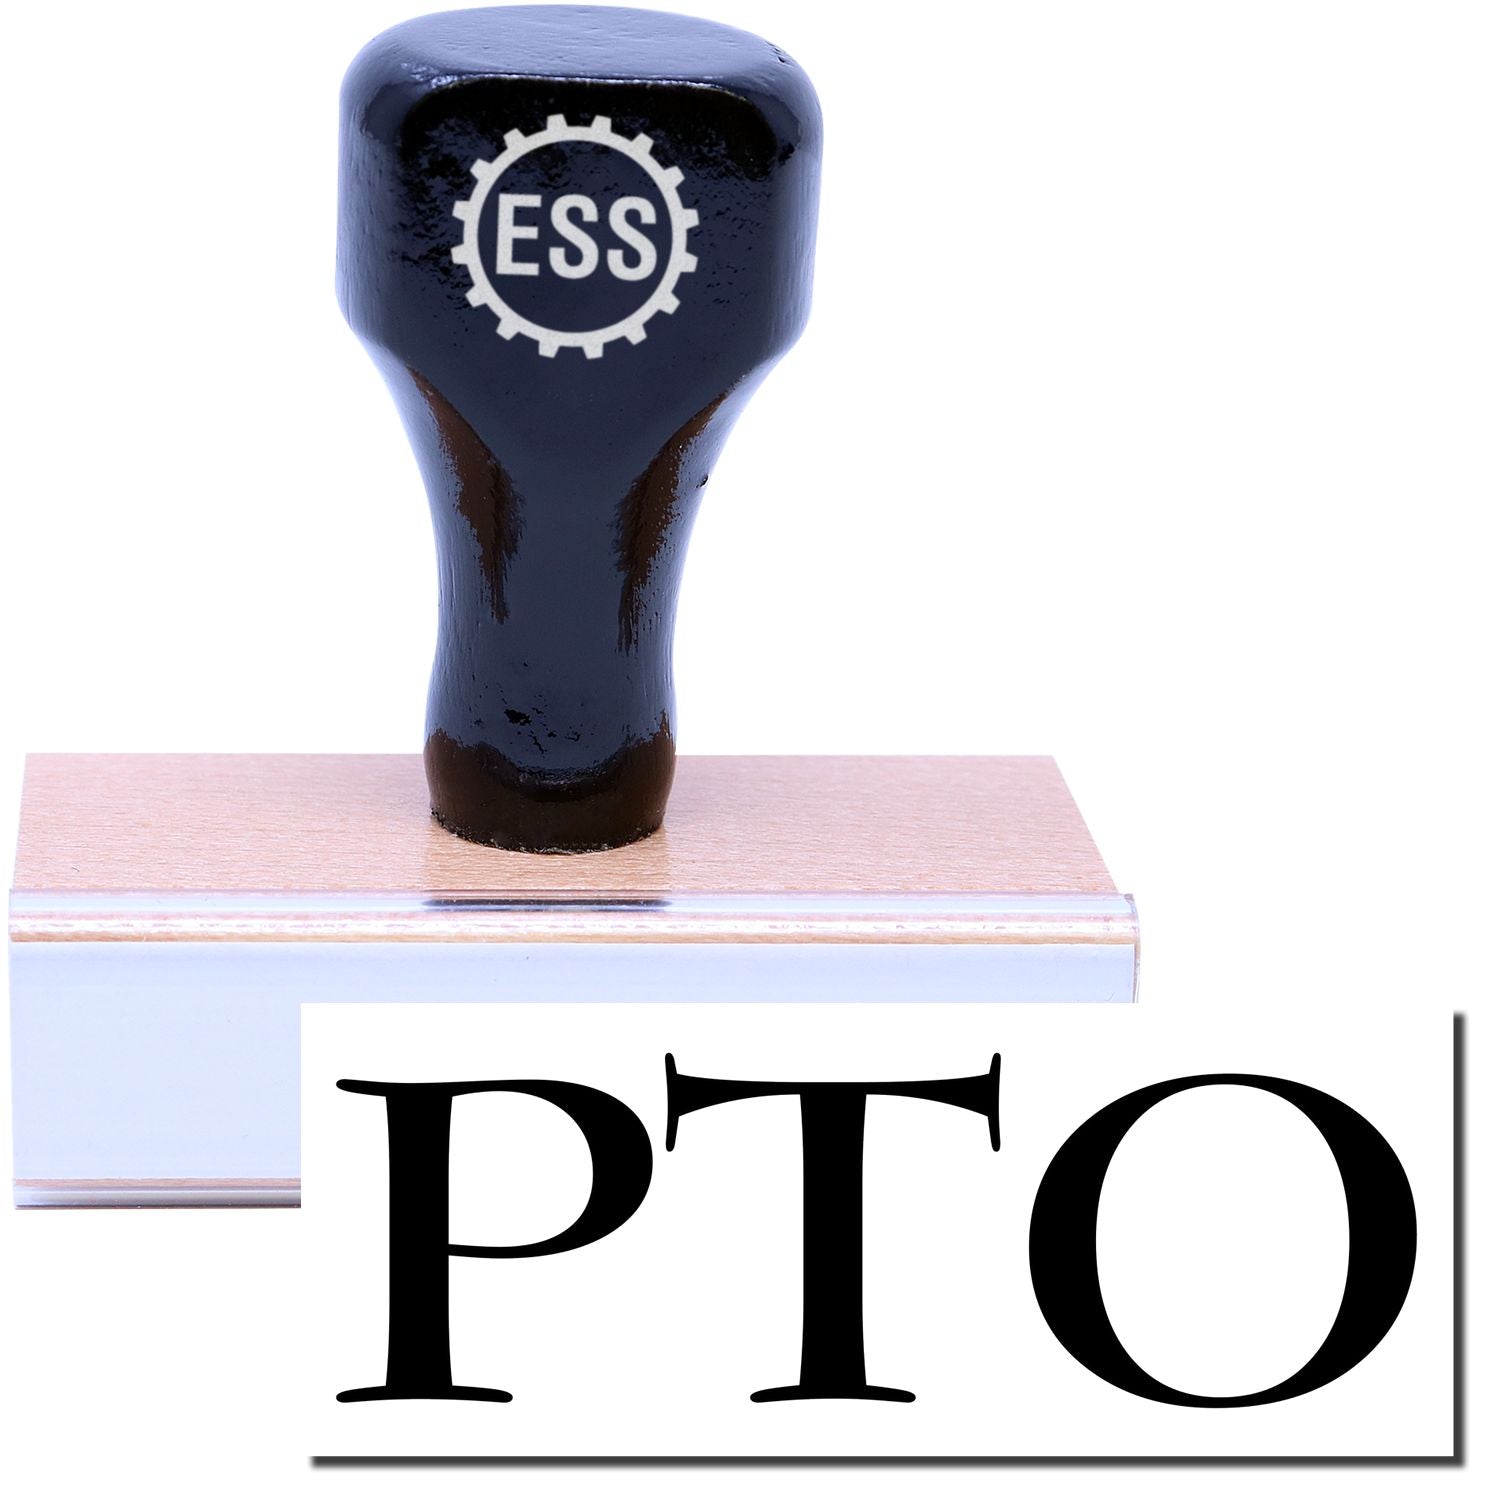 A stock office rubber stamp with a stamped image showing how the text "PTO" is displayed after stamping.